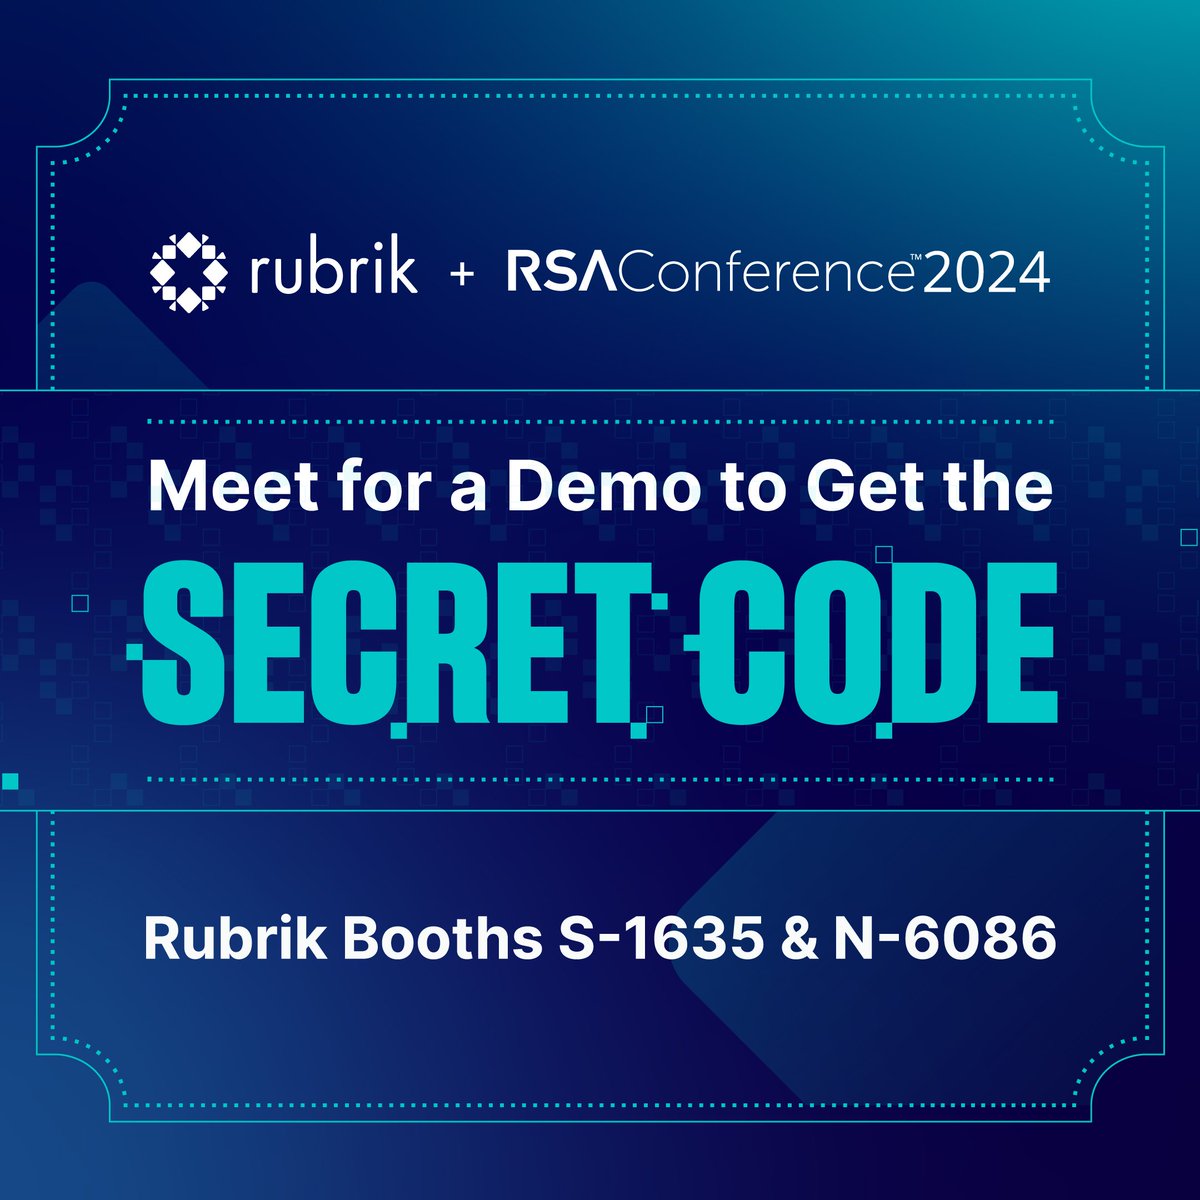 Don’t tell anyone 🤫…but if you go to @RubrikInc’s booths at @RSAConference (S-1635 and N-6086), ask for the SECRET CODE. You’ll get access to an exclusive area on the expo floor…and you can thank me later. Learn more: rbrk.co/3x3810m